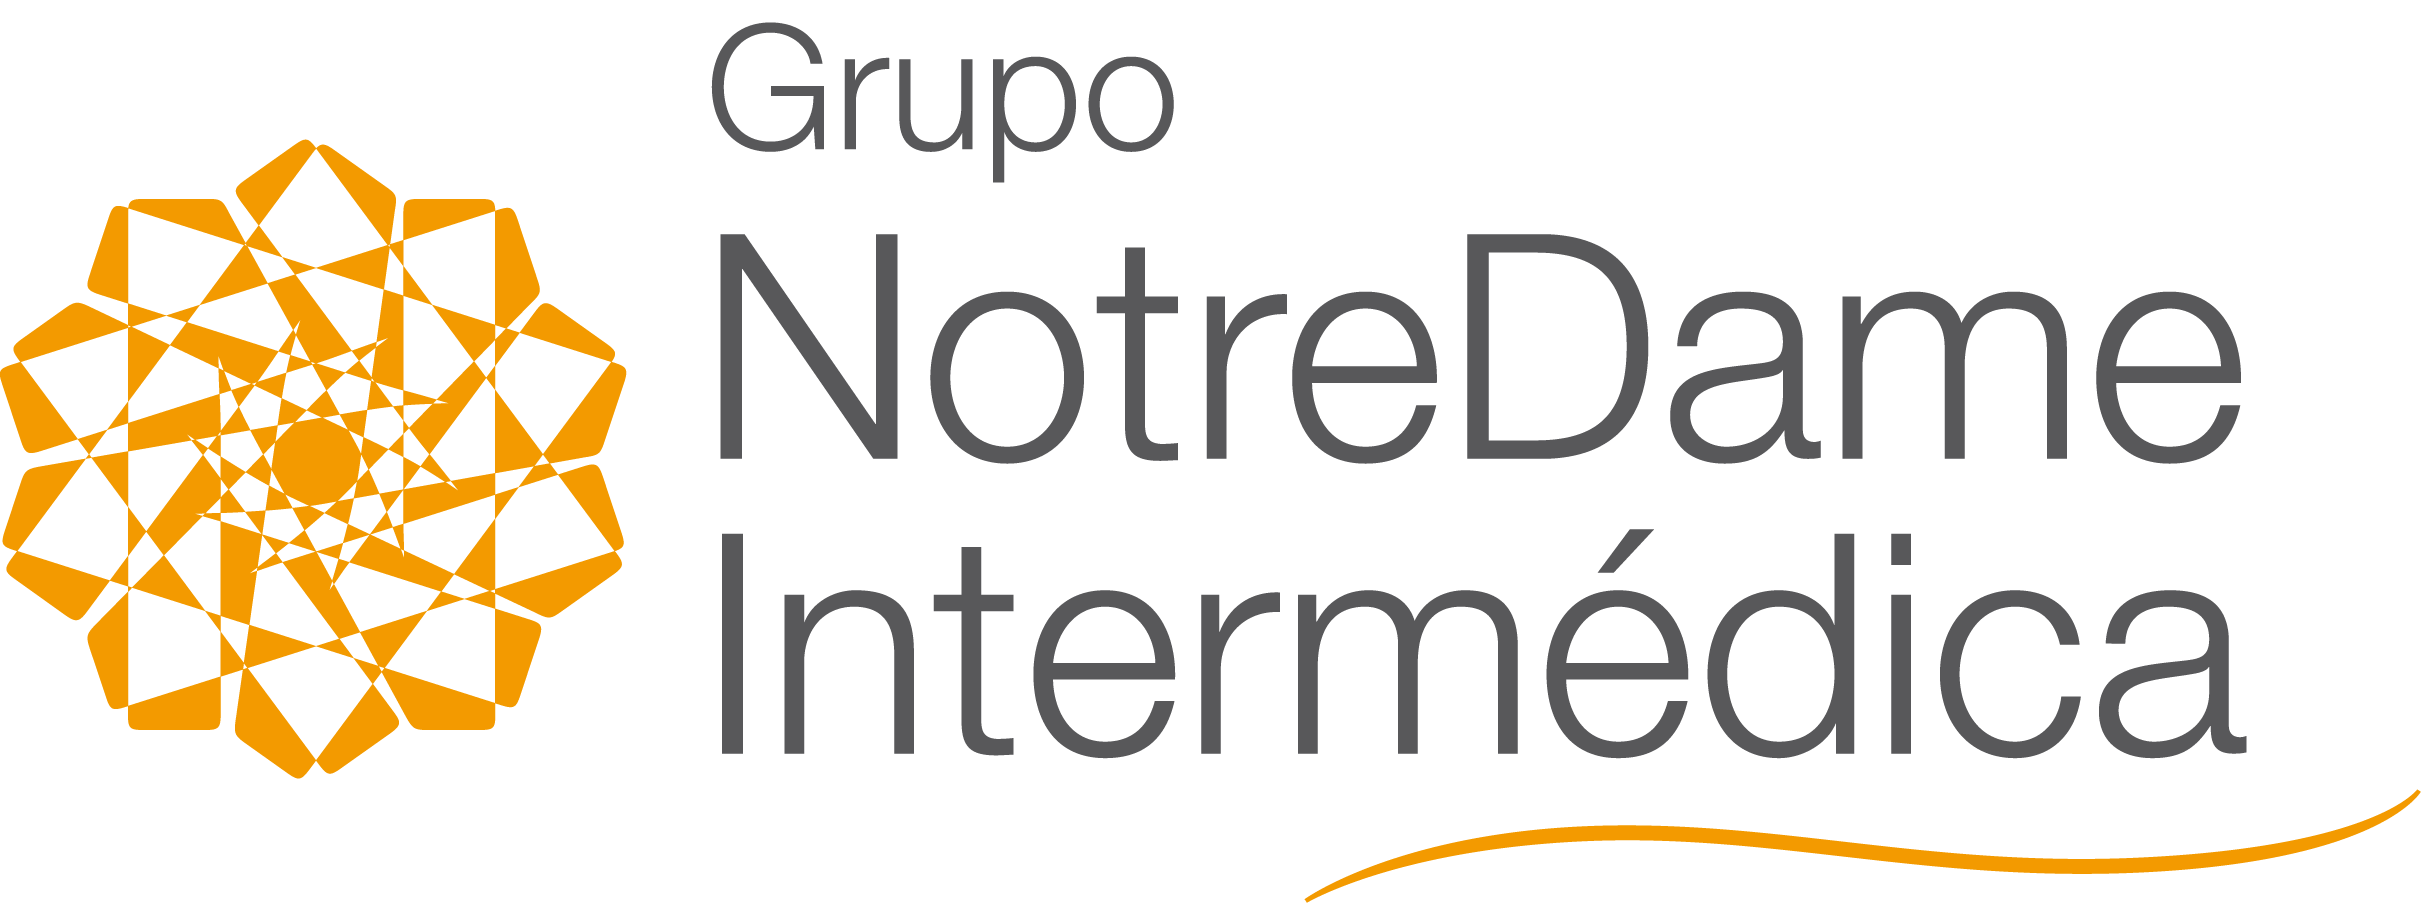 Press release: Grupo NotreDame Intermédica (GNDI) of Brazil enhances patient care and improves patient access to leading-edge medications by joining Clinerion’s global network of hospital partners on Patient Network Explorer.